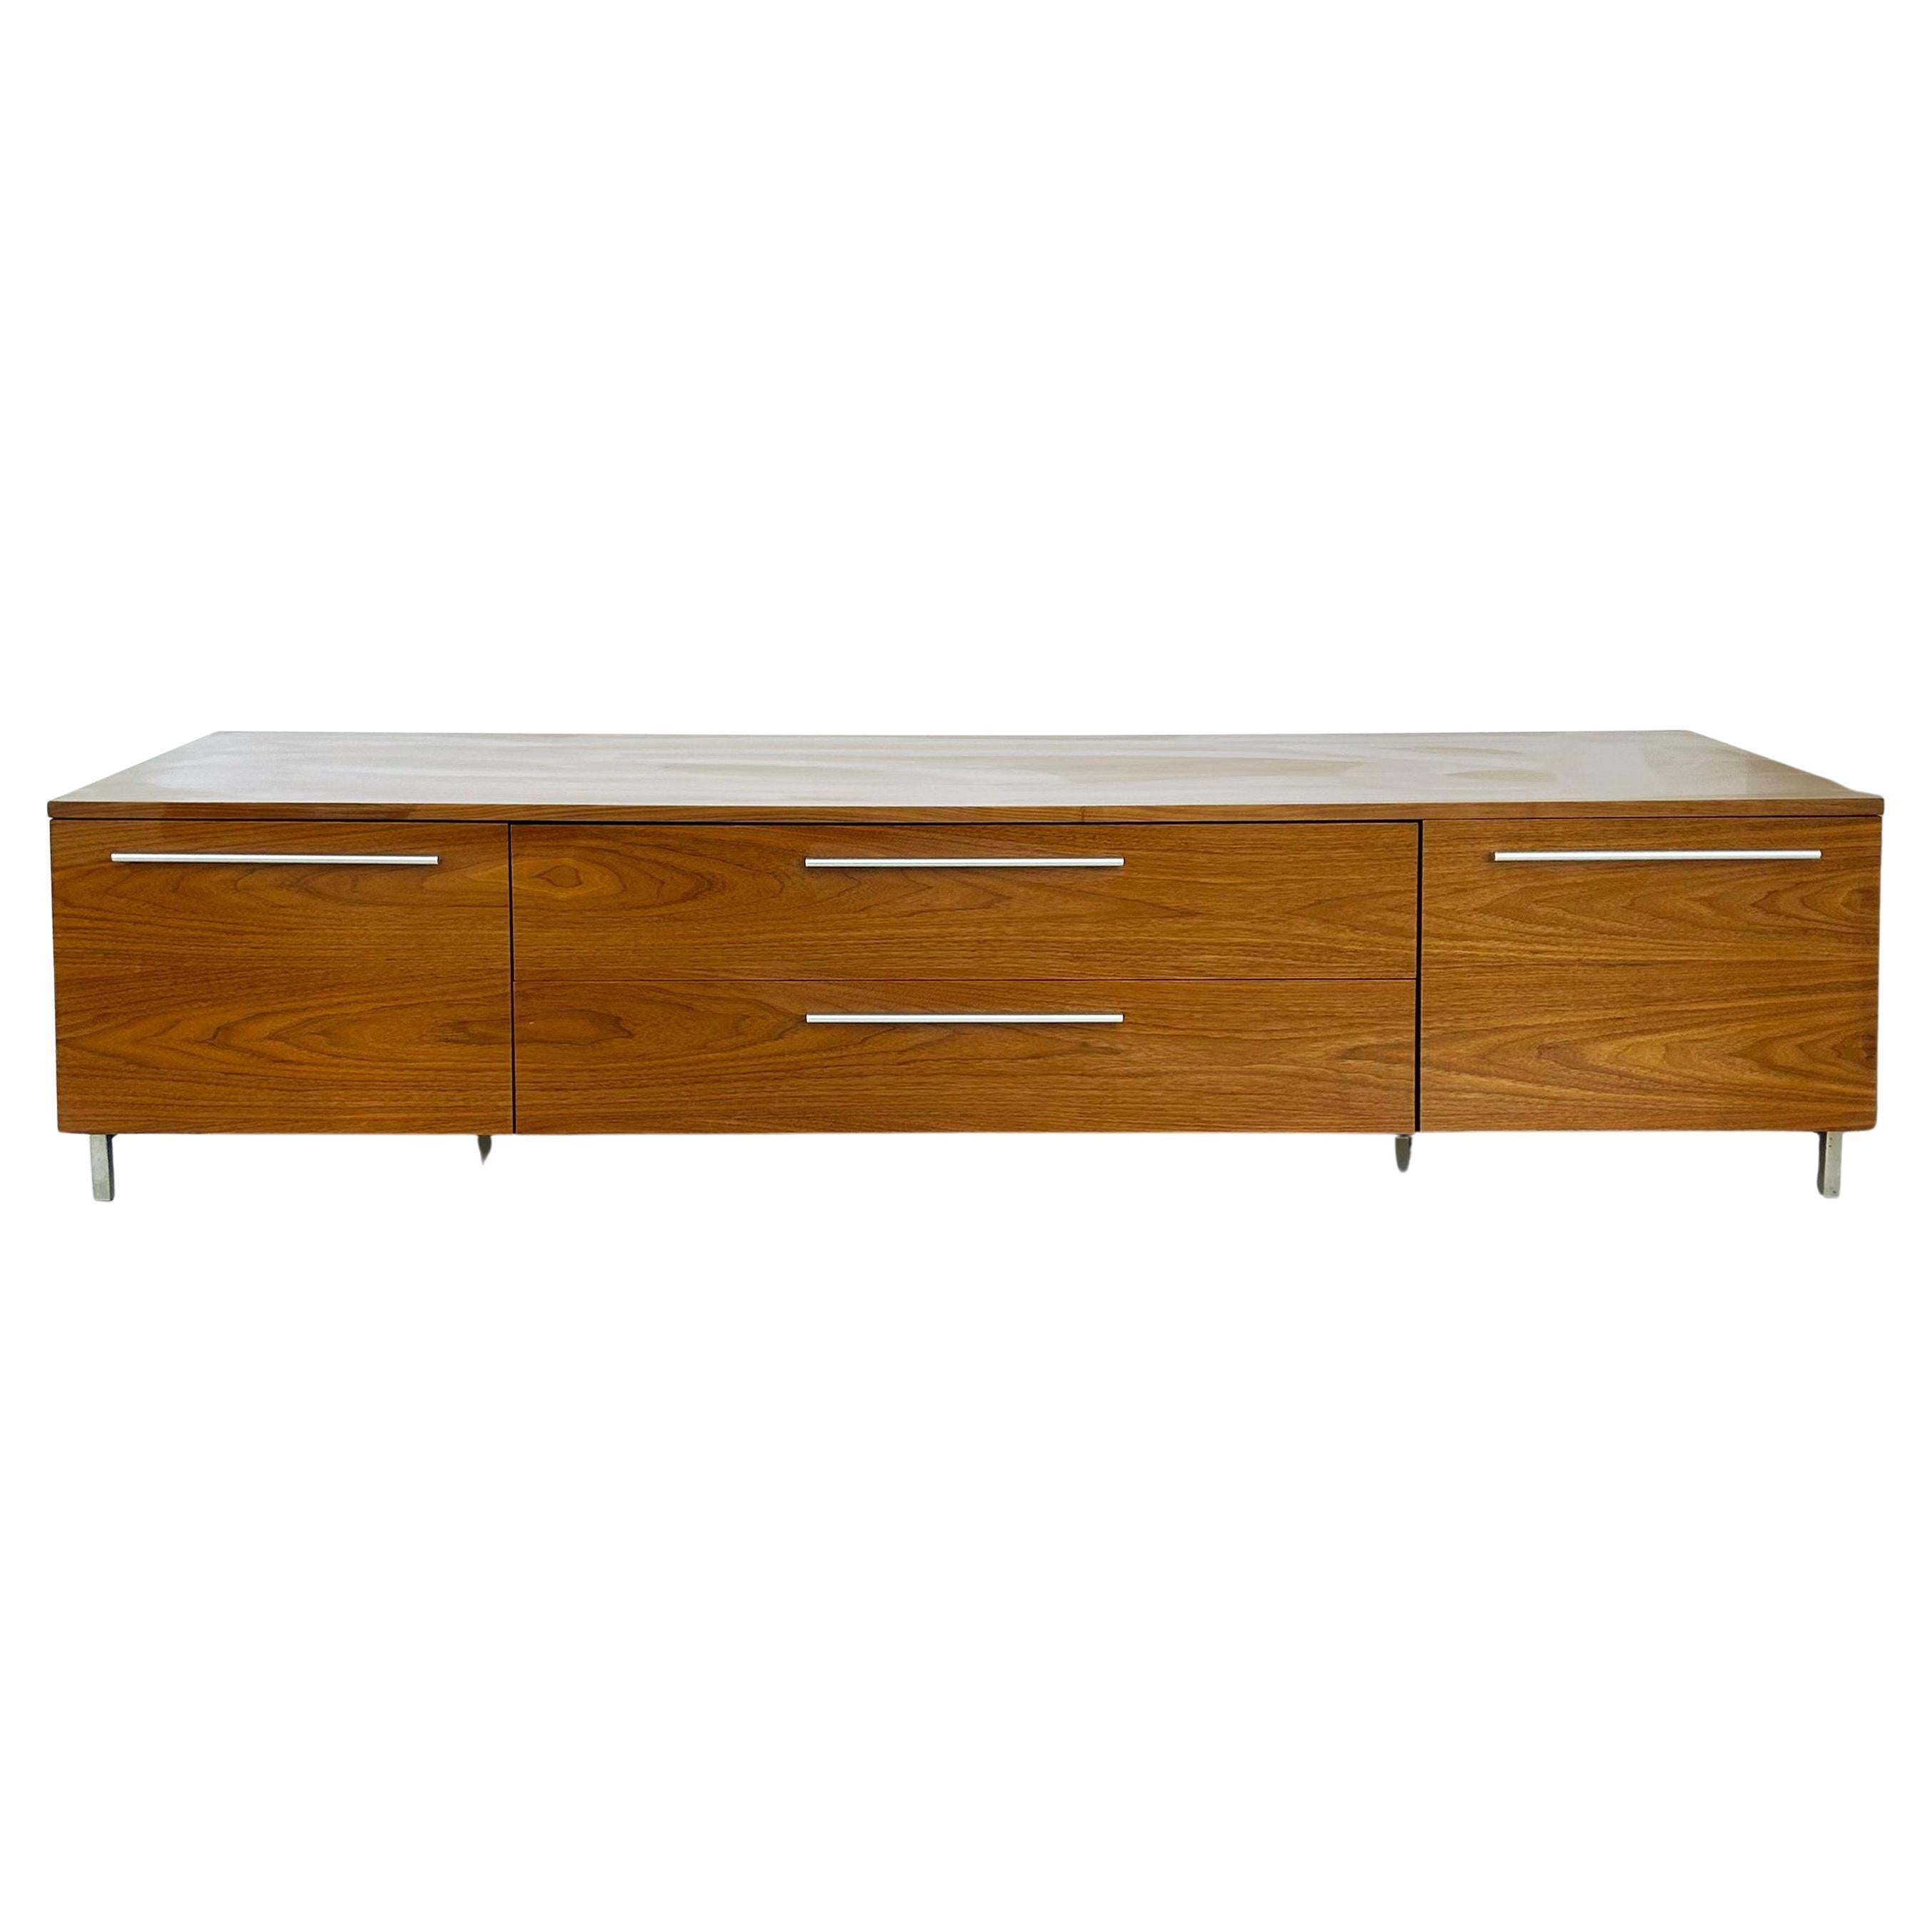 Mahogany Stainless Steel Low Credenza/Entertainment Cabinet For Sale